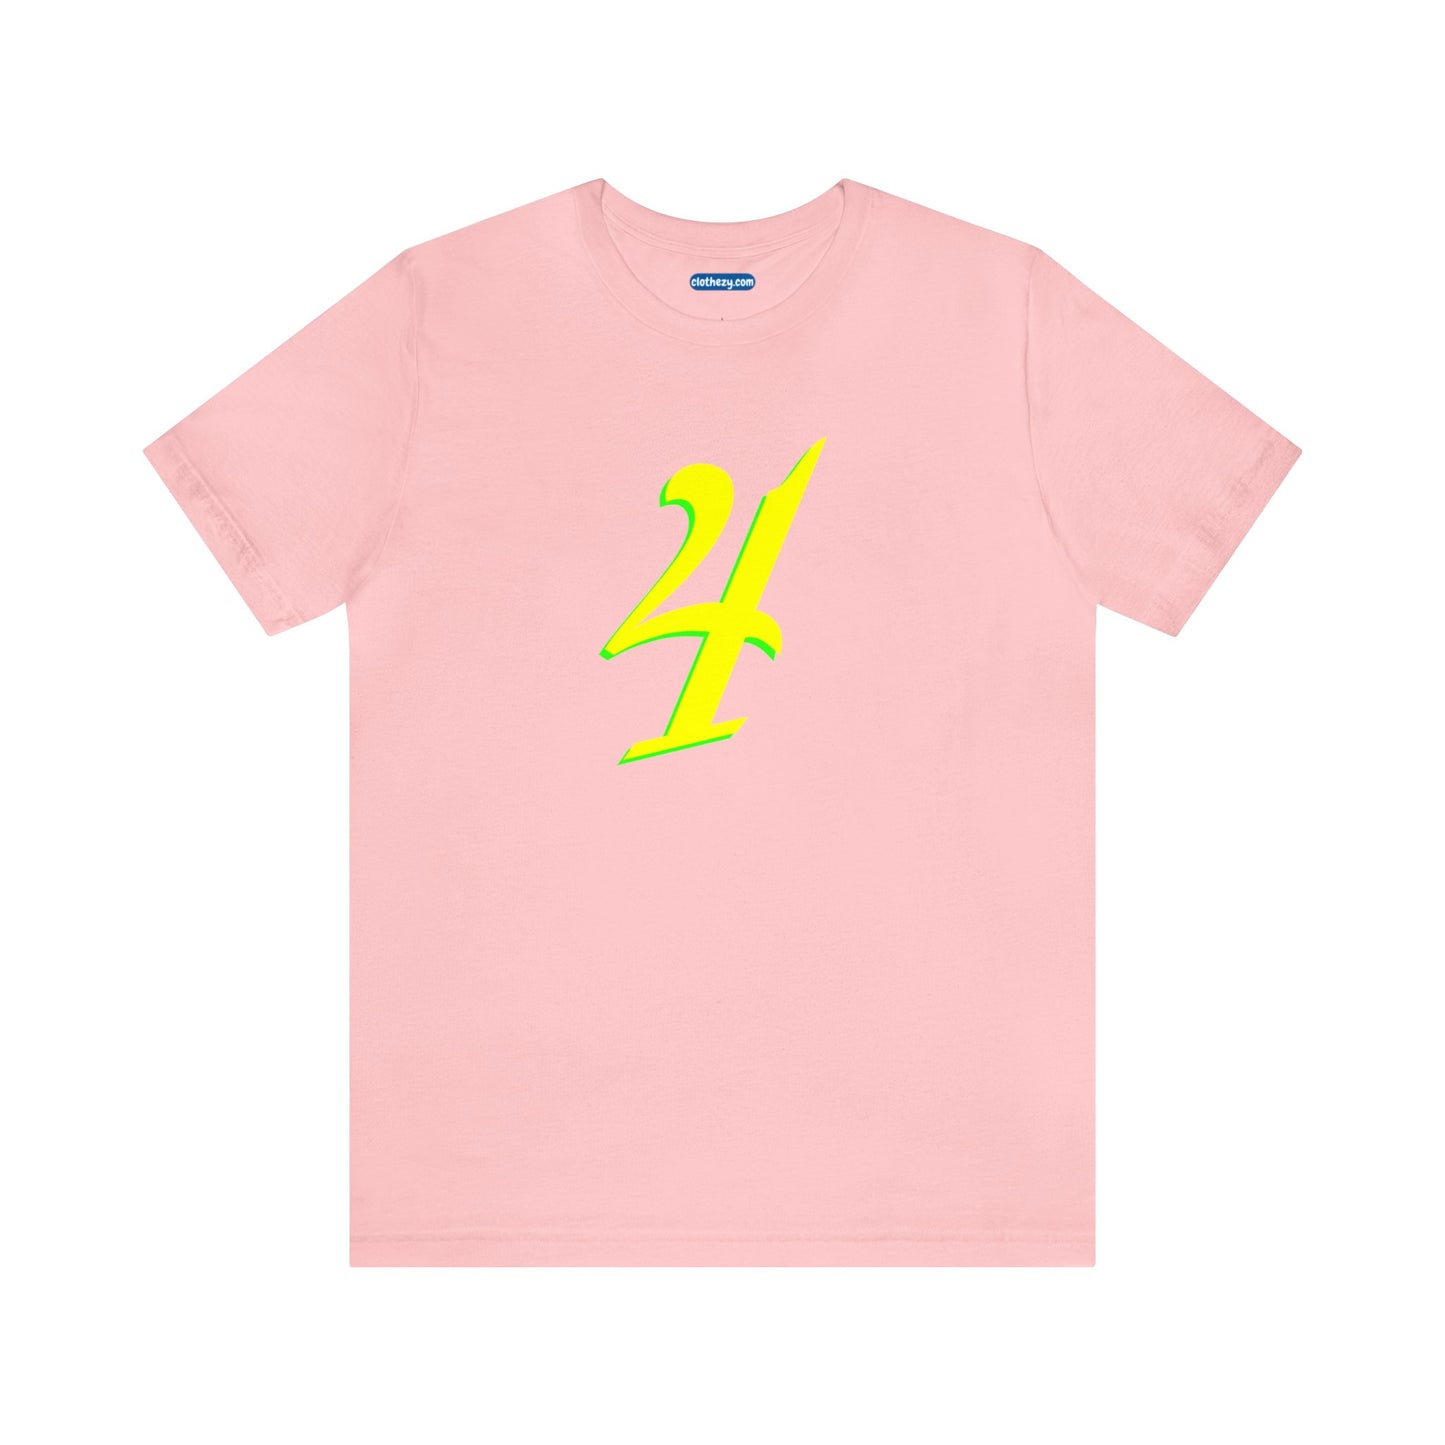 Number 4 Design - Soft Cotton Tee for birthdays and celebrations, Gift for friends and family, Multiple Options by clothezy.com in Pink Size Small - Buy Now